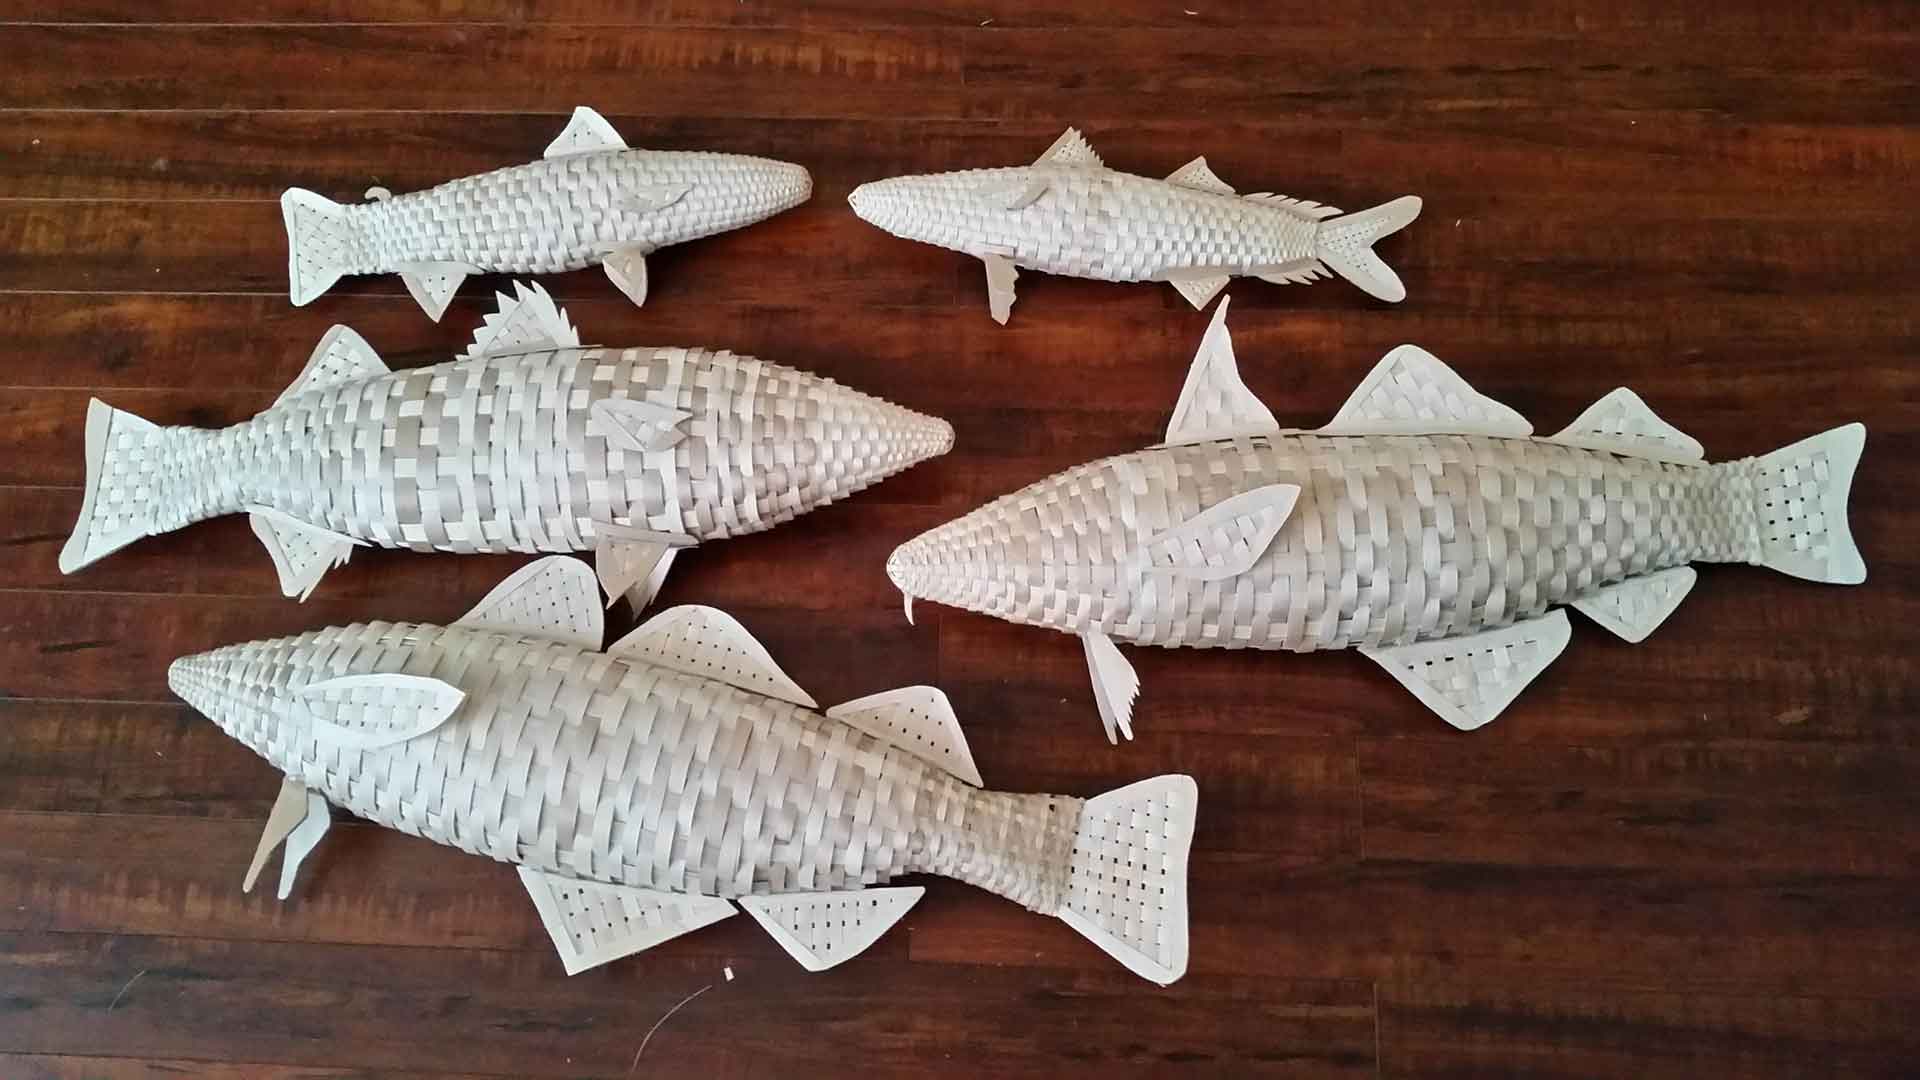 Several species of fish, woven from wood strips.